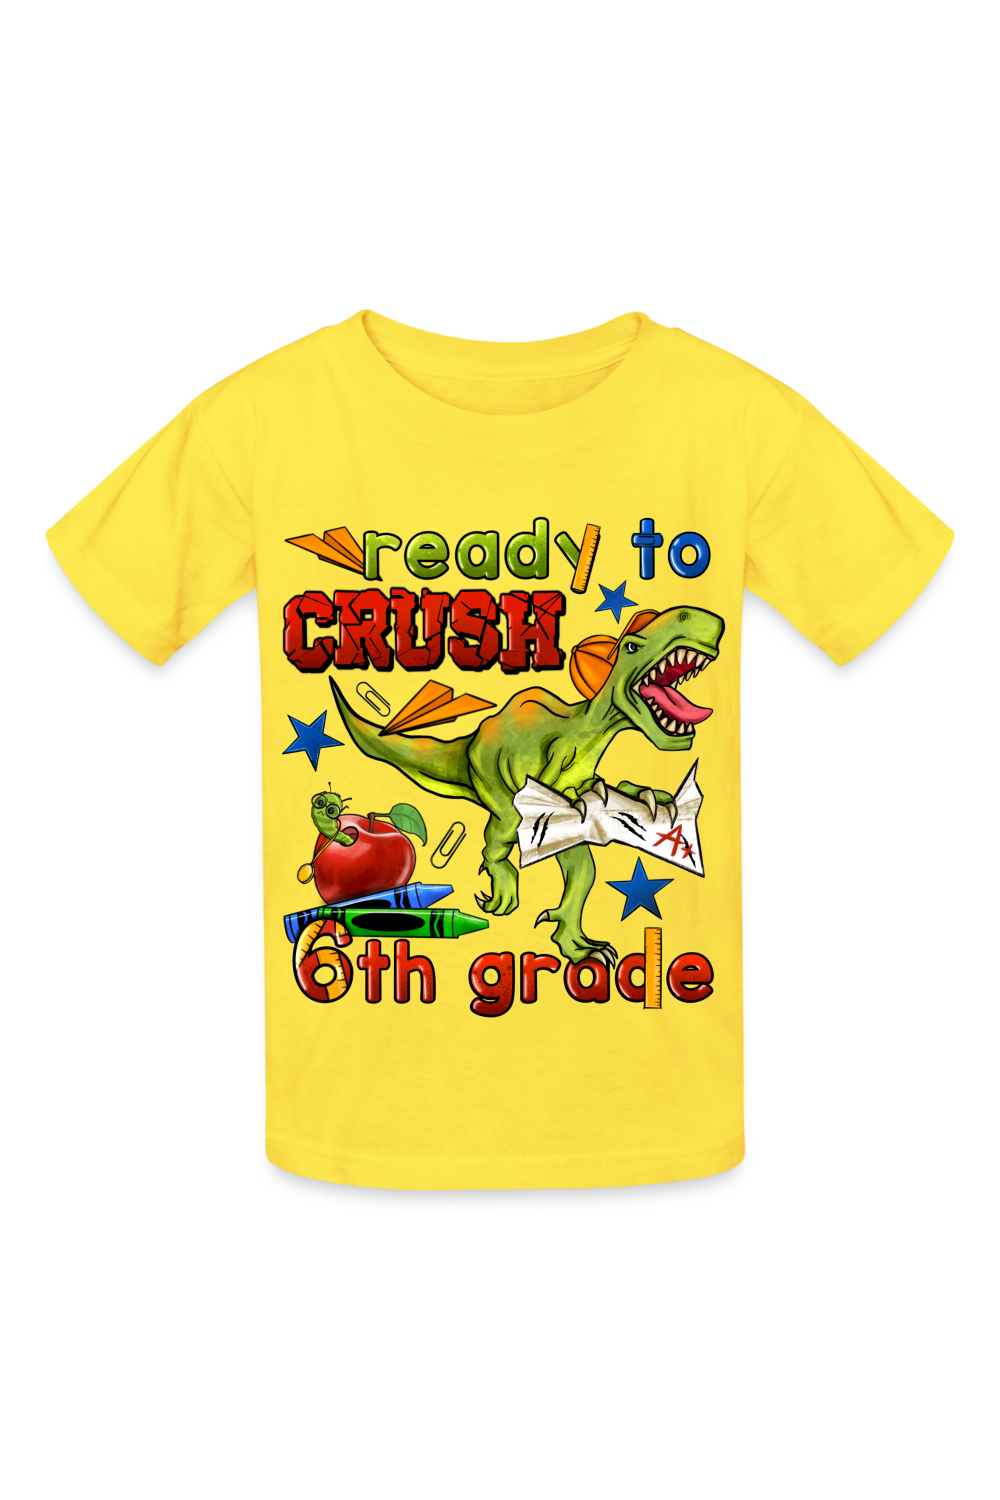 Boys Ready To Crush Six Grade Short Sleeve Tee Shirts for Back To School - yellow - NicholesGifts.online